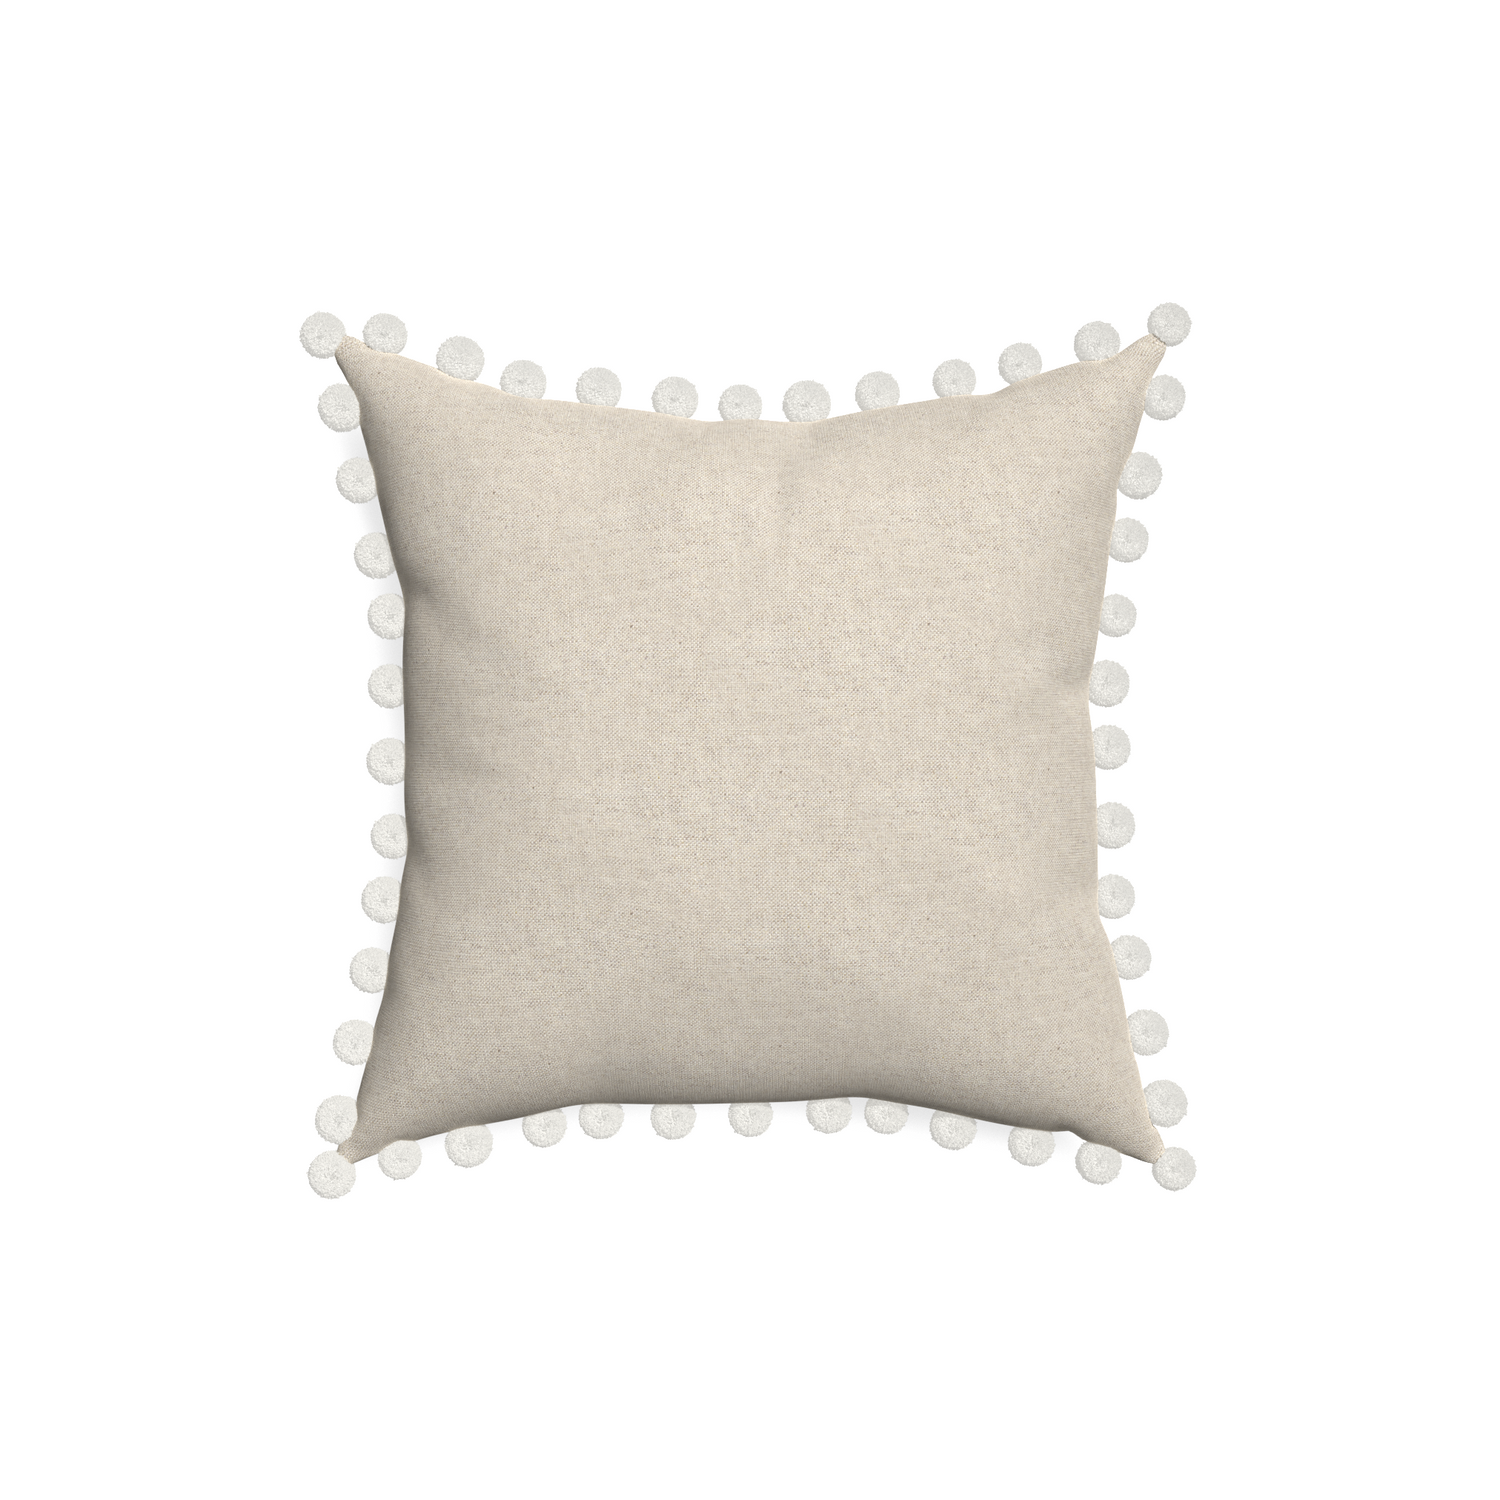 18-square oat custom light brownpillow with snow pom pom on white background